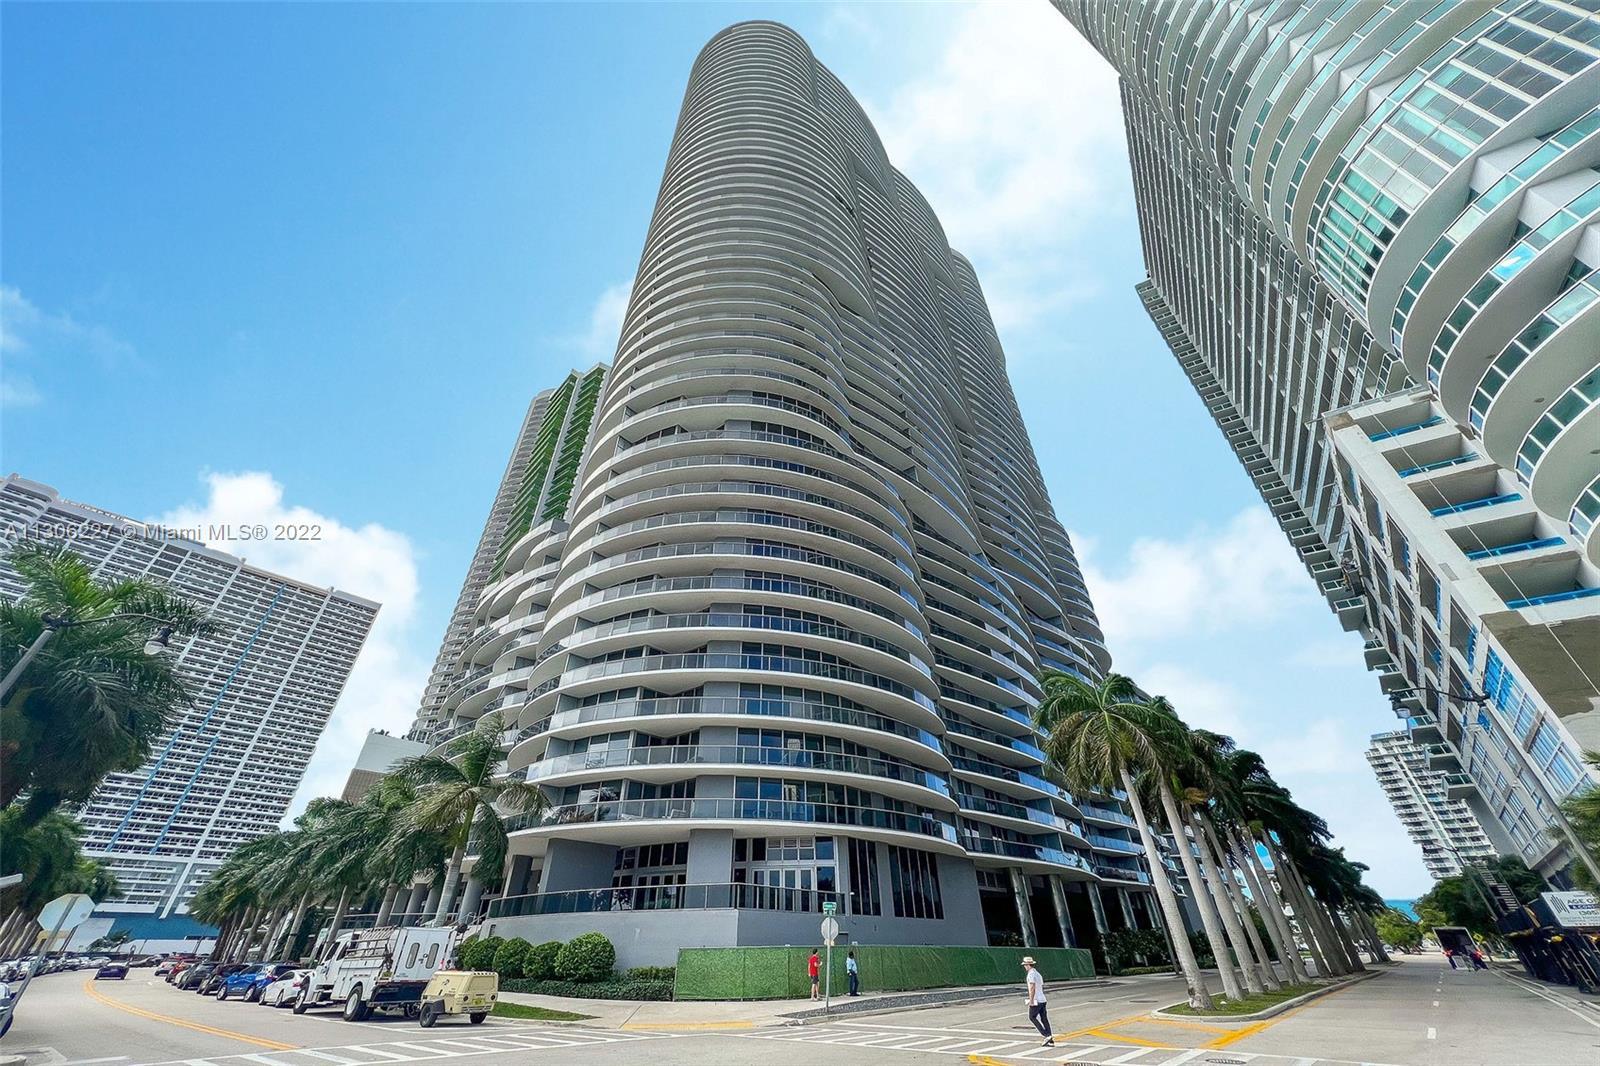 LUXURY & LOCATION, BRIGHT & SPACIOUS 3/4 + DEN CORNER UNIT WITH A MAGNIFICENT 180 VIEW OF BISCAYNE B